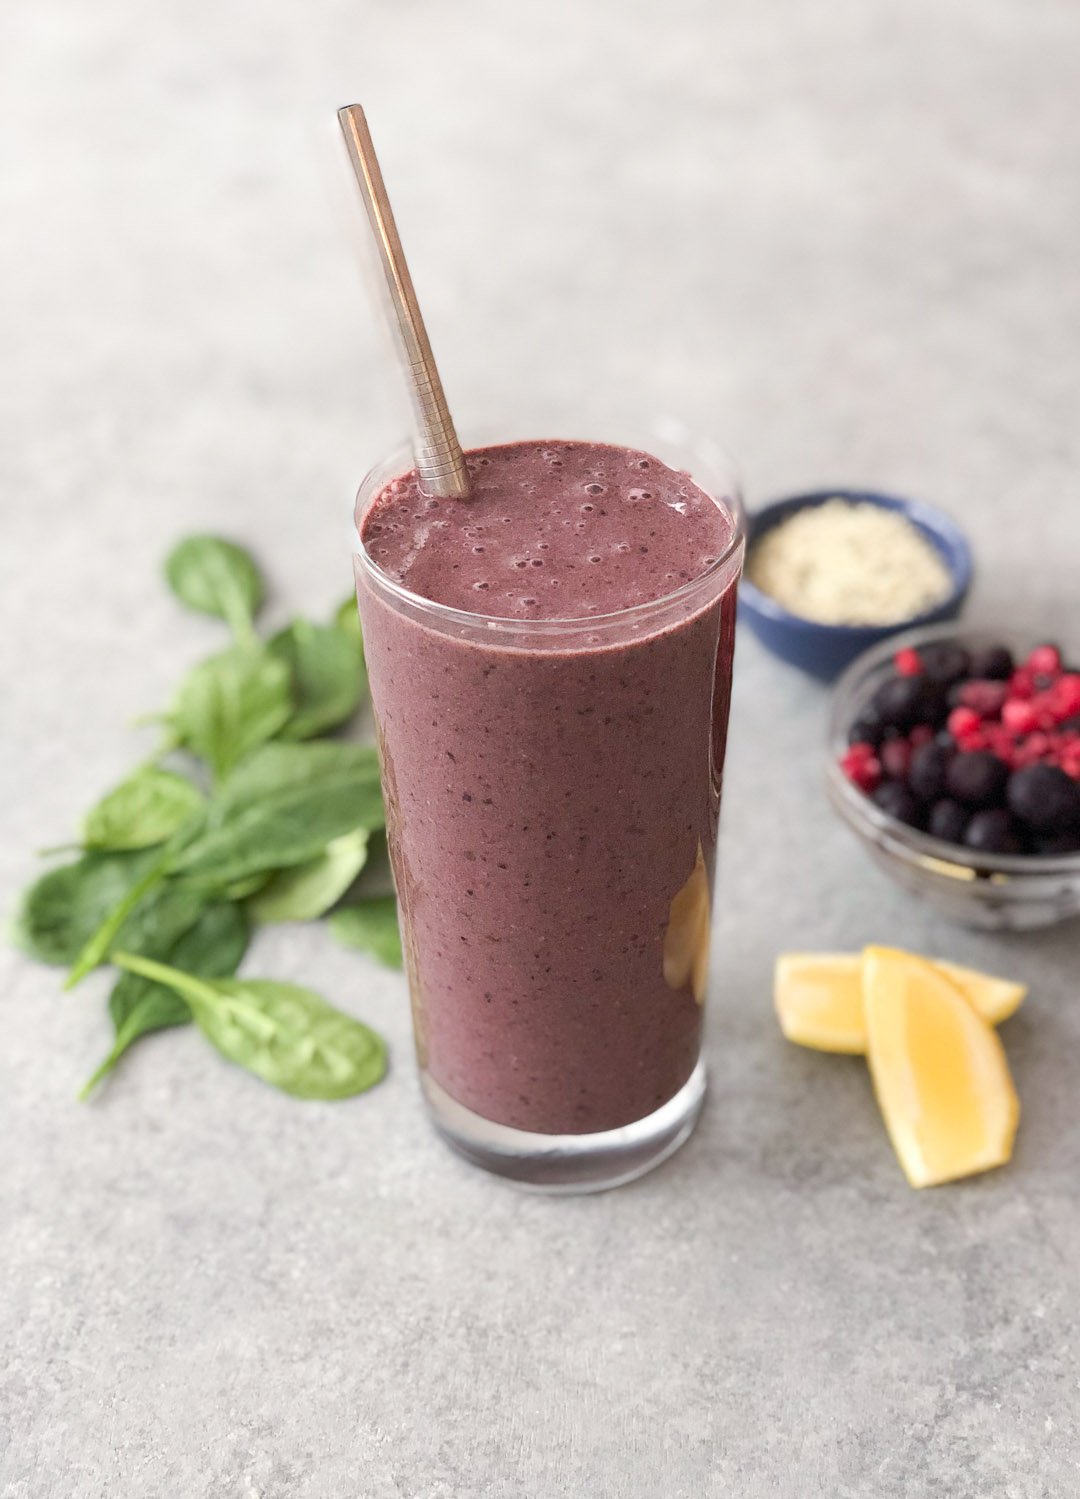 Purple colored smoothie in a glass with a metal straw. The cup is surrounded by spinach leaves , lemon slices, and bowls of fruit and seeds. 